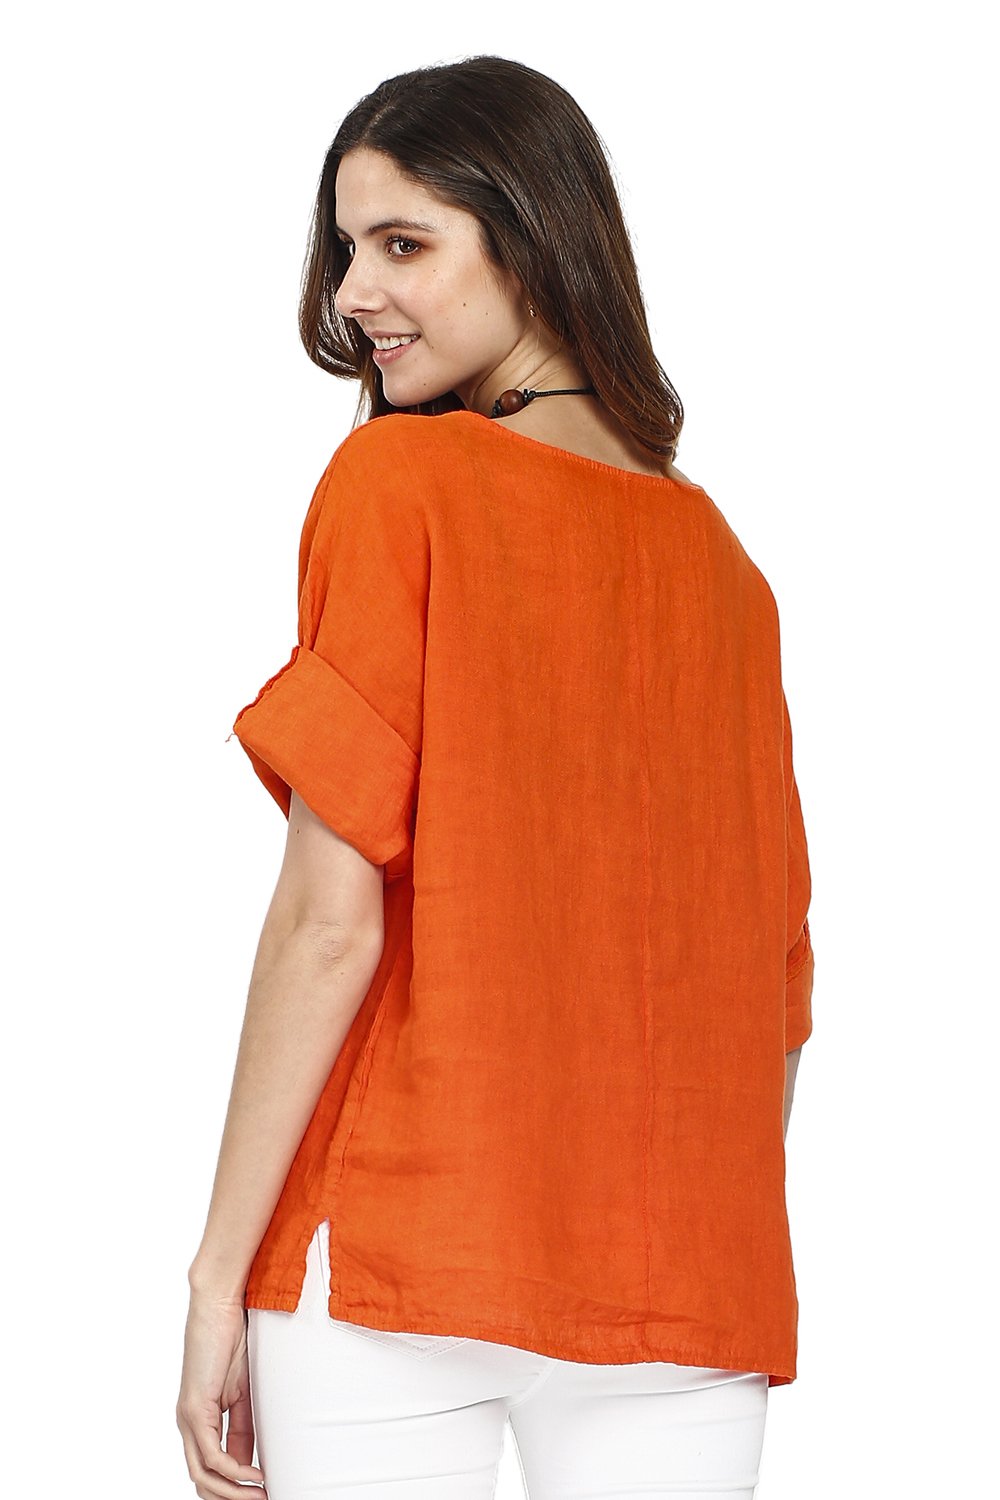 WIDE ROUND COLLAR LINEN TOP WITH ATTACHABLE SLEEVES